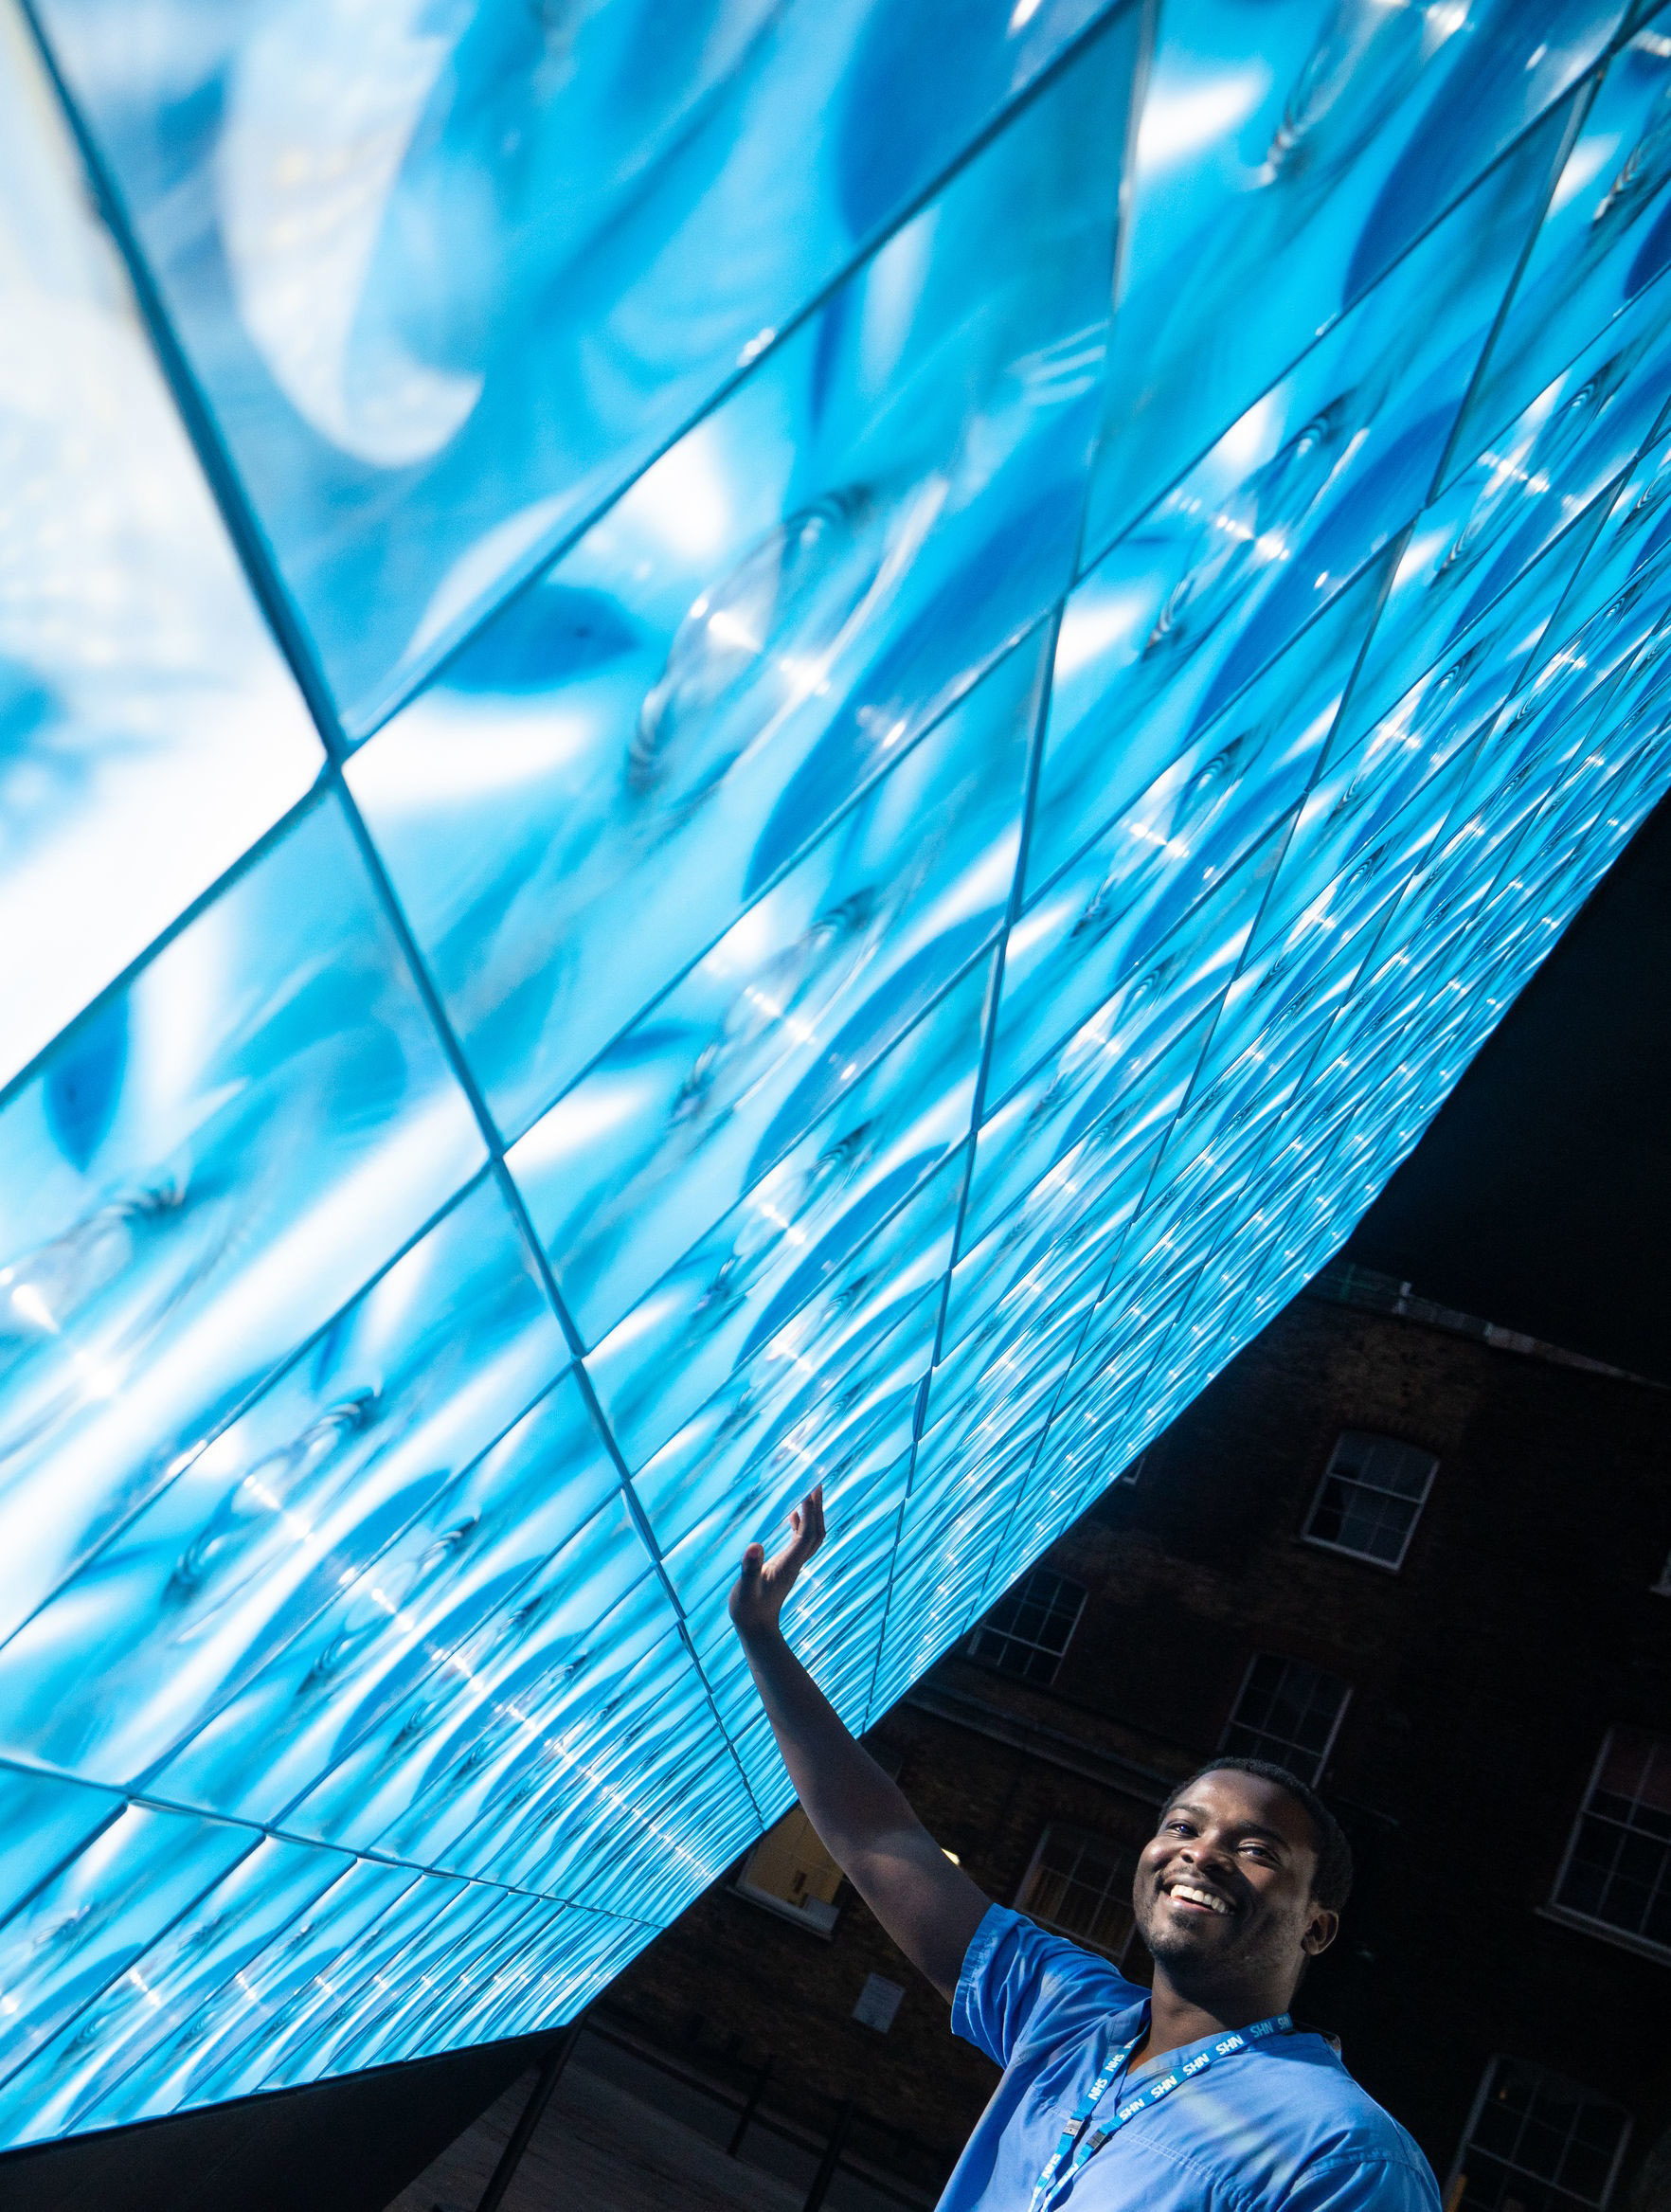 Trauma and Orthopaedic Surgeon Frank Acquaah looks at the Tunnel of Light at Guy’s and St Thomas’ Hospital in London Picture: DOMINIC LIPINSKI/PA